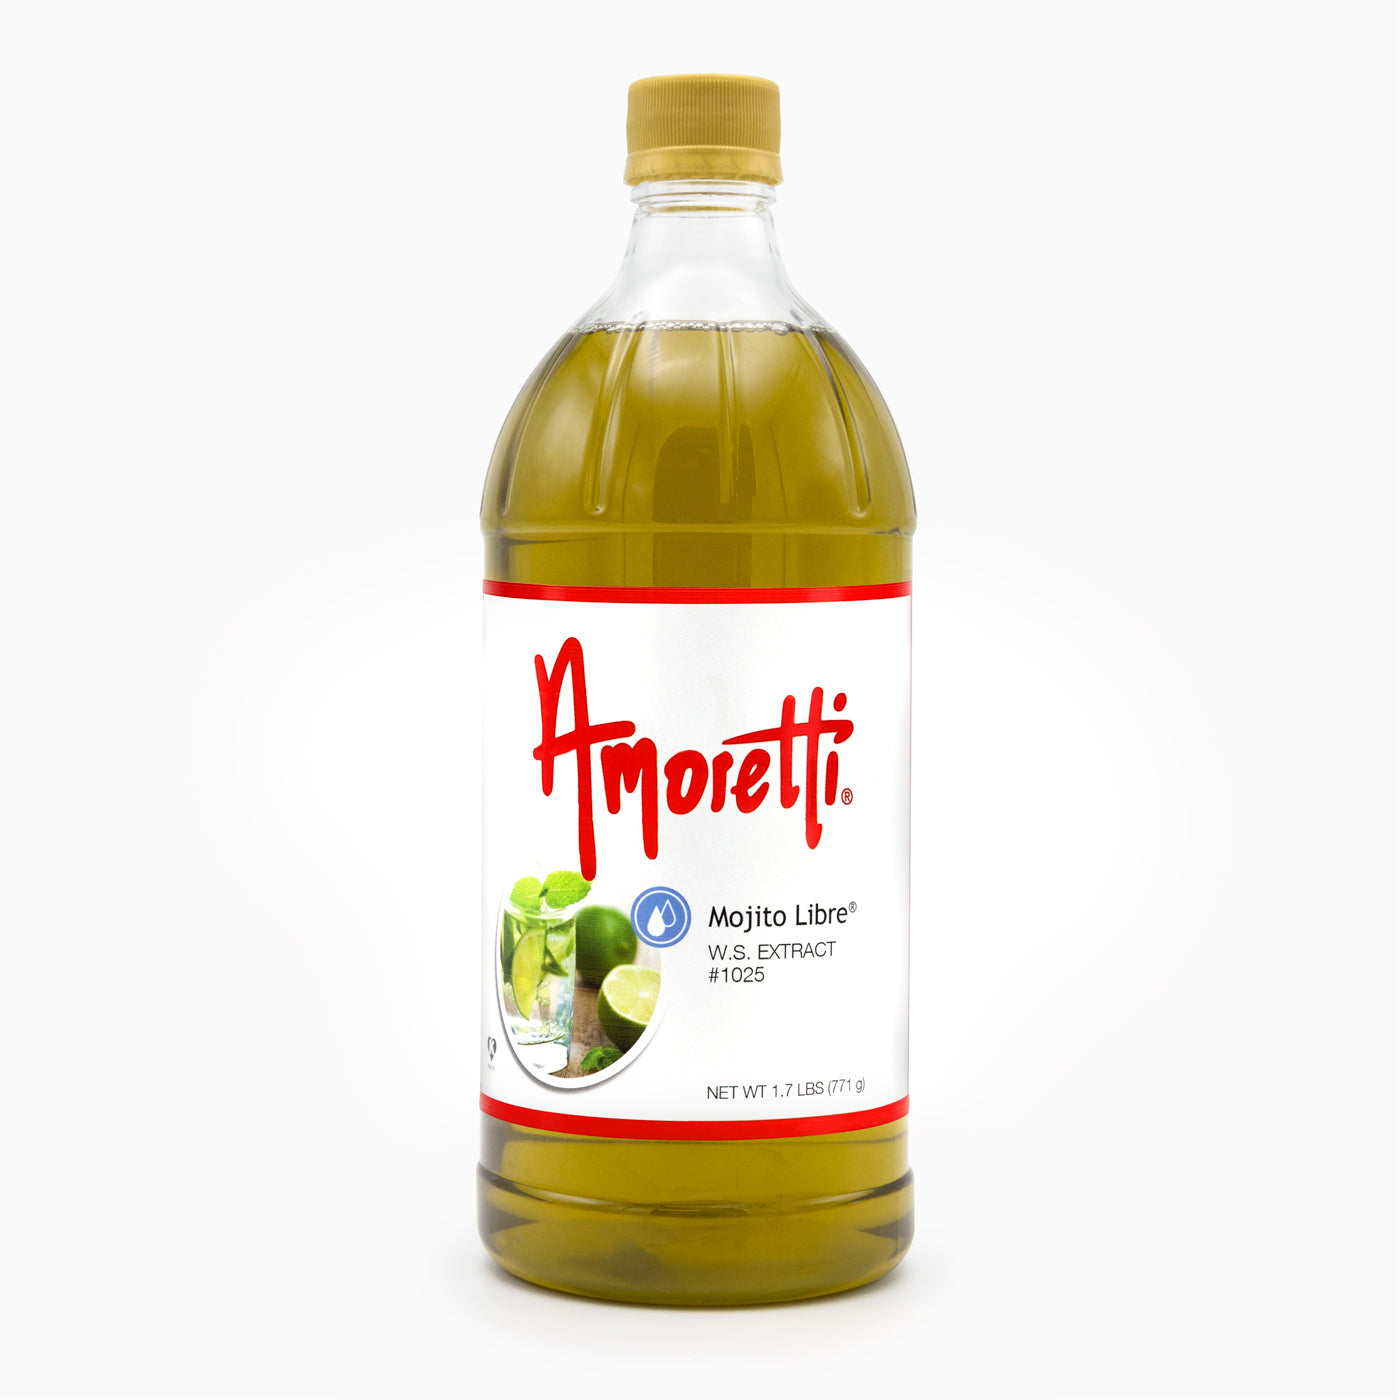 Mojito Libre Soluble & — Water (mint Extract lime) Amoretti